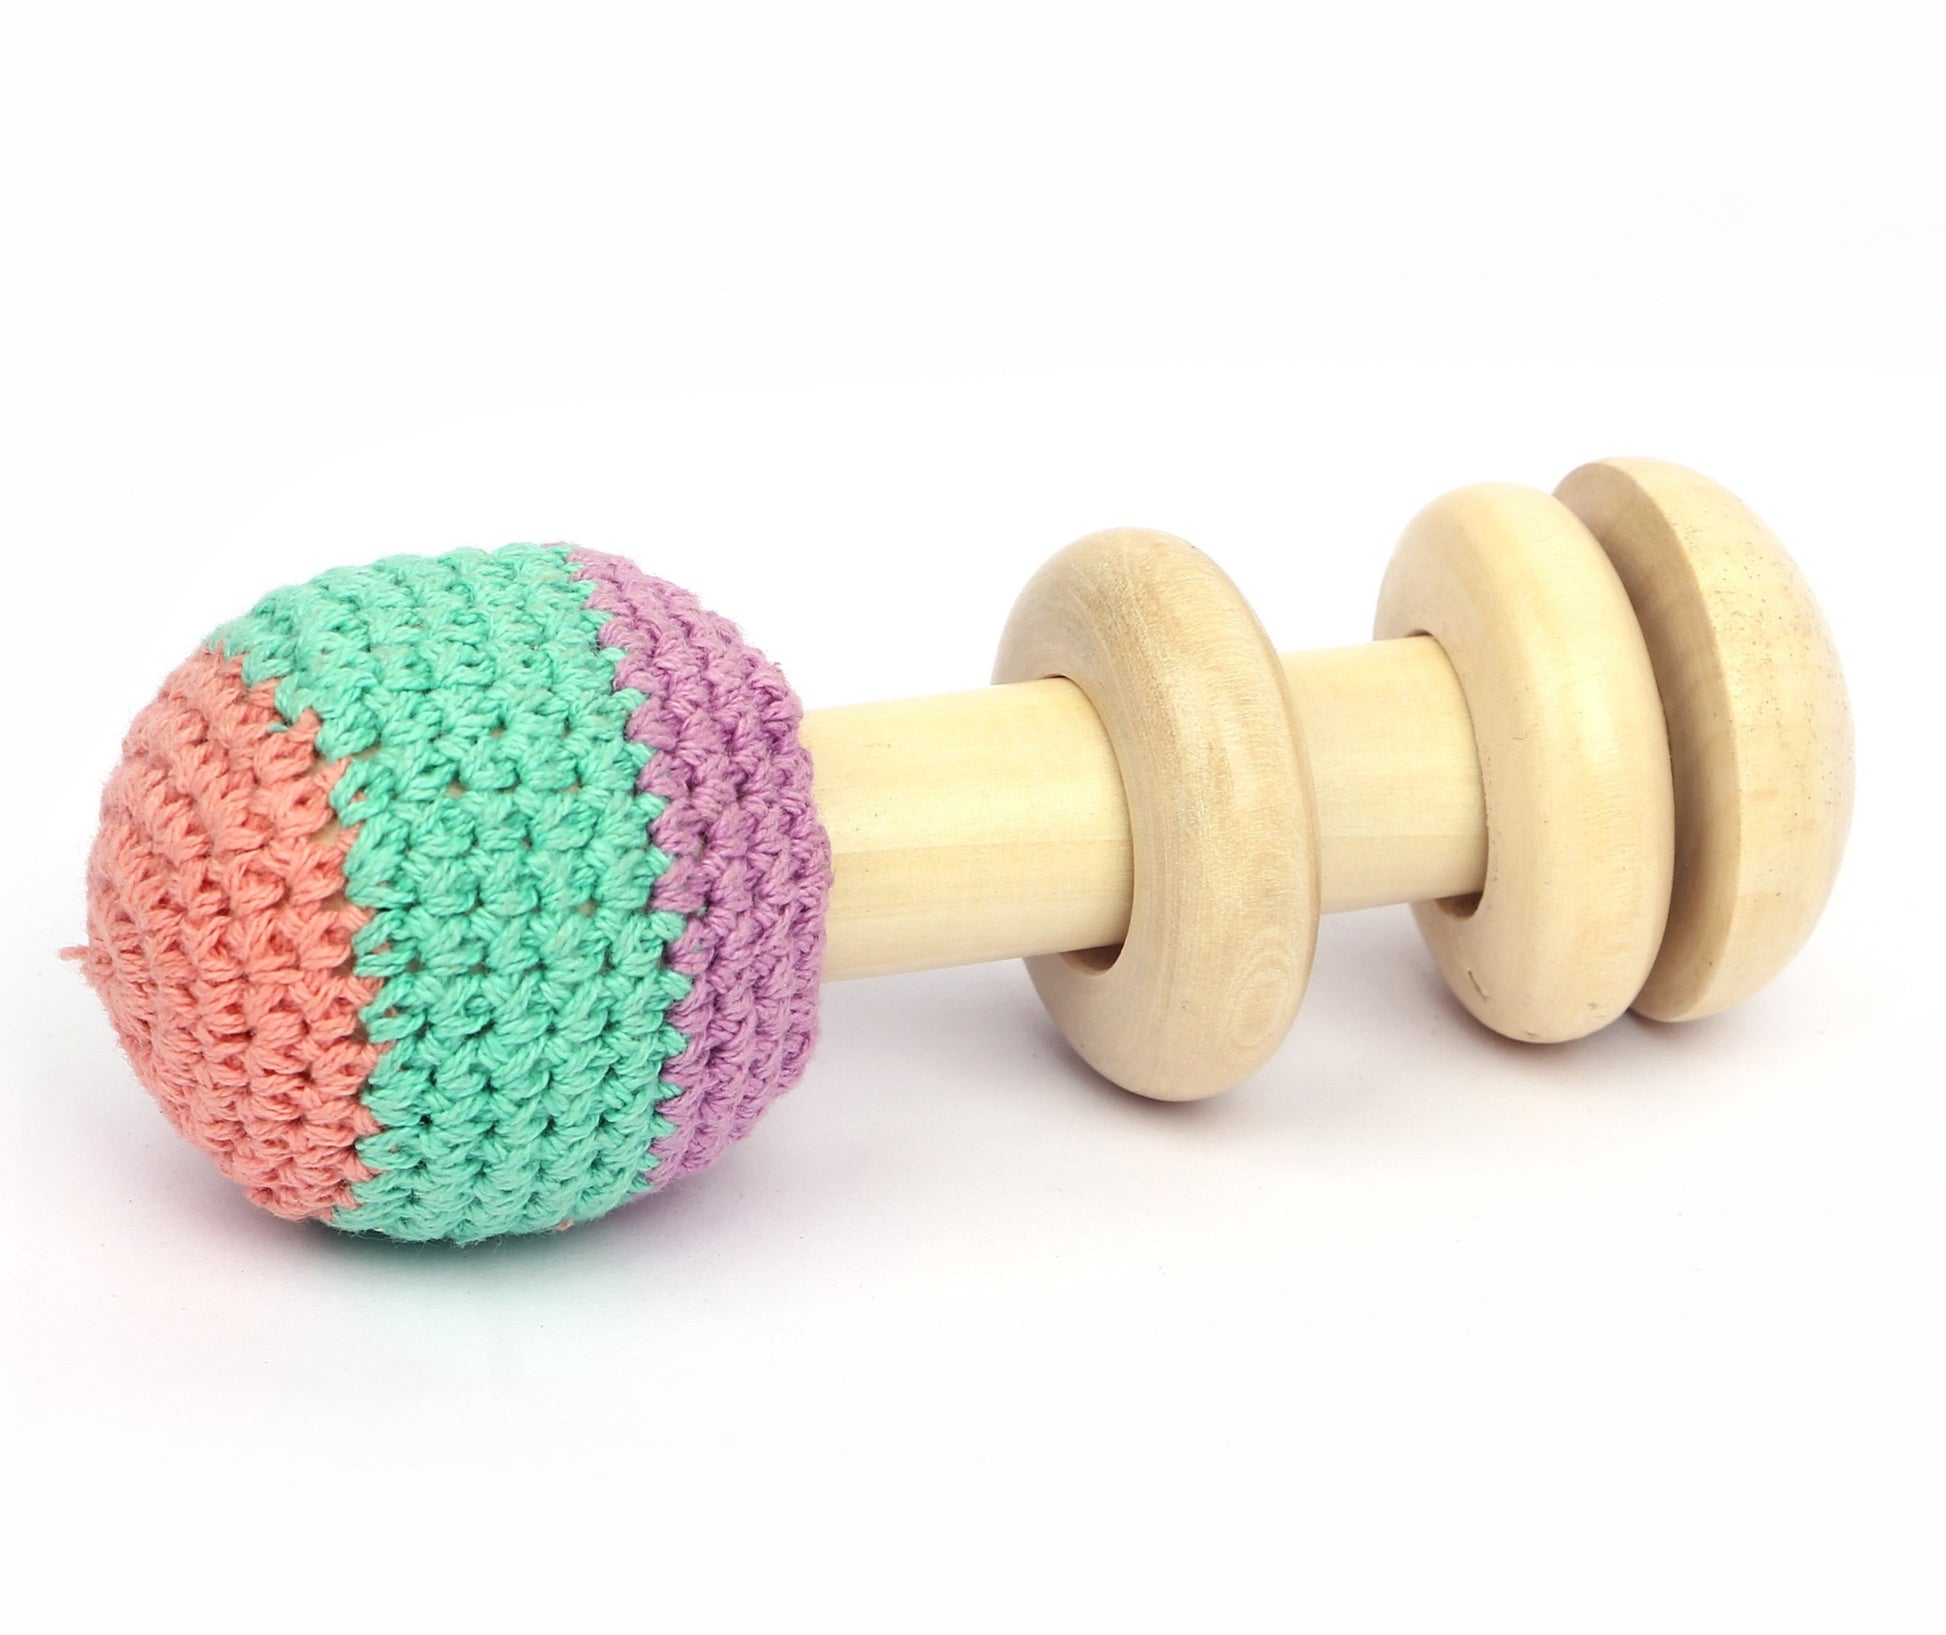 A wooden baby rattle with a crocheted ball on top. The rattle also has colorful wooden rings.